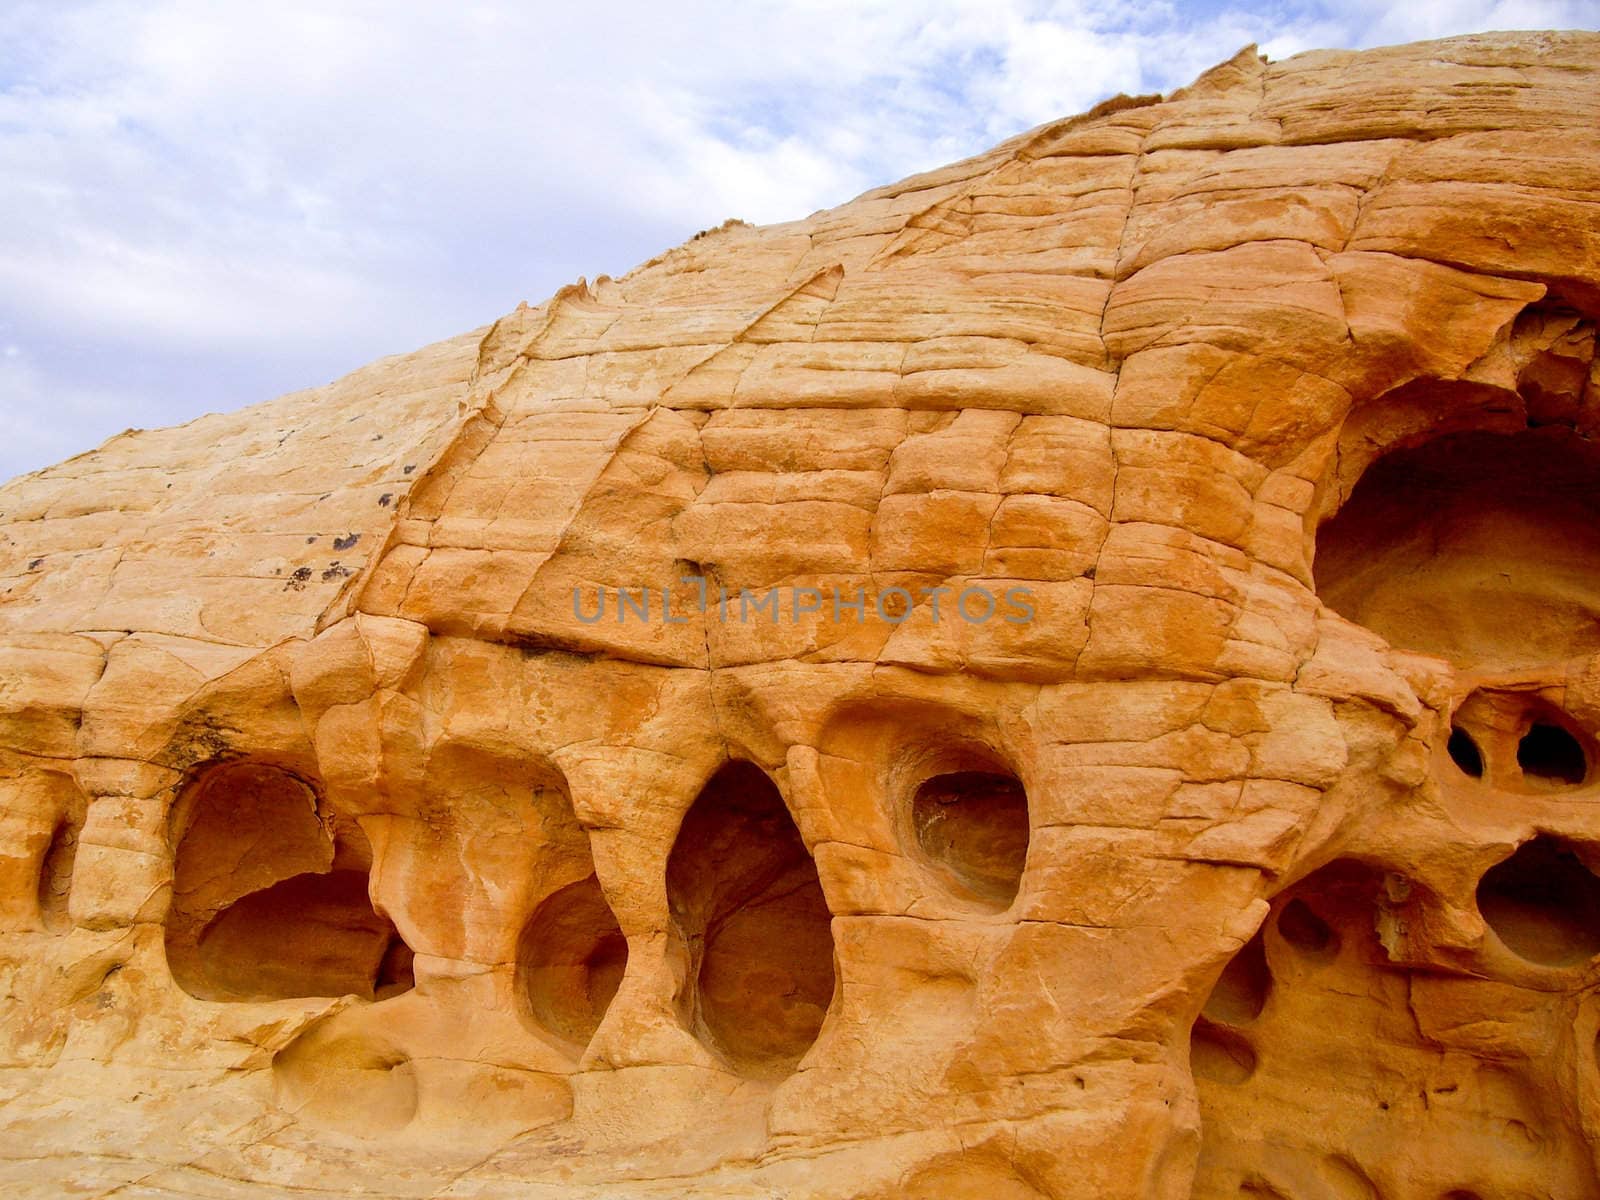 Holes show powerful erosion of sandstone at Valley of Fire